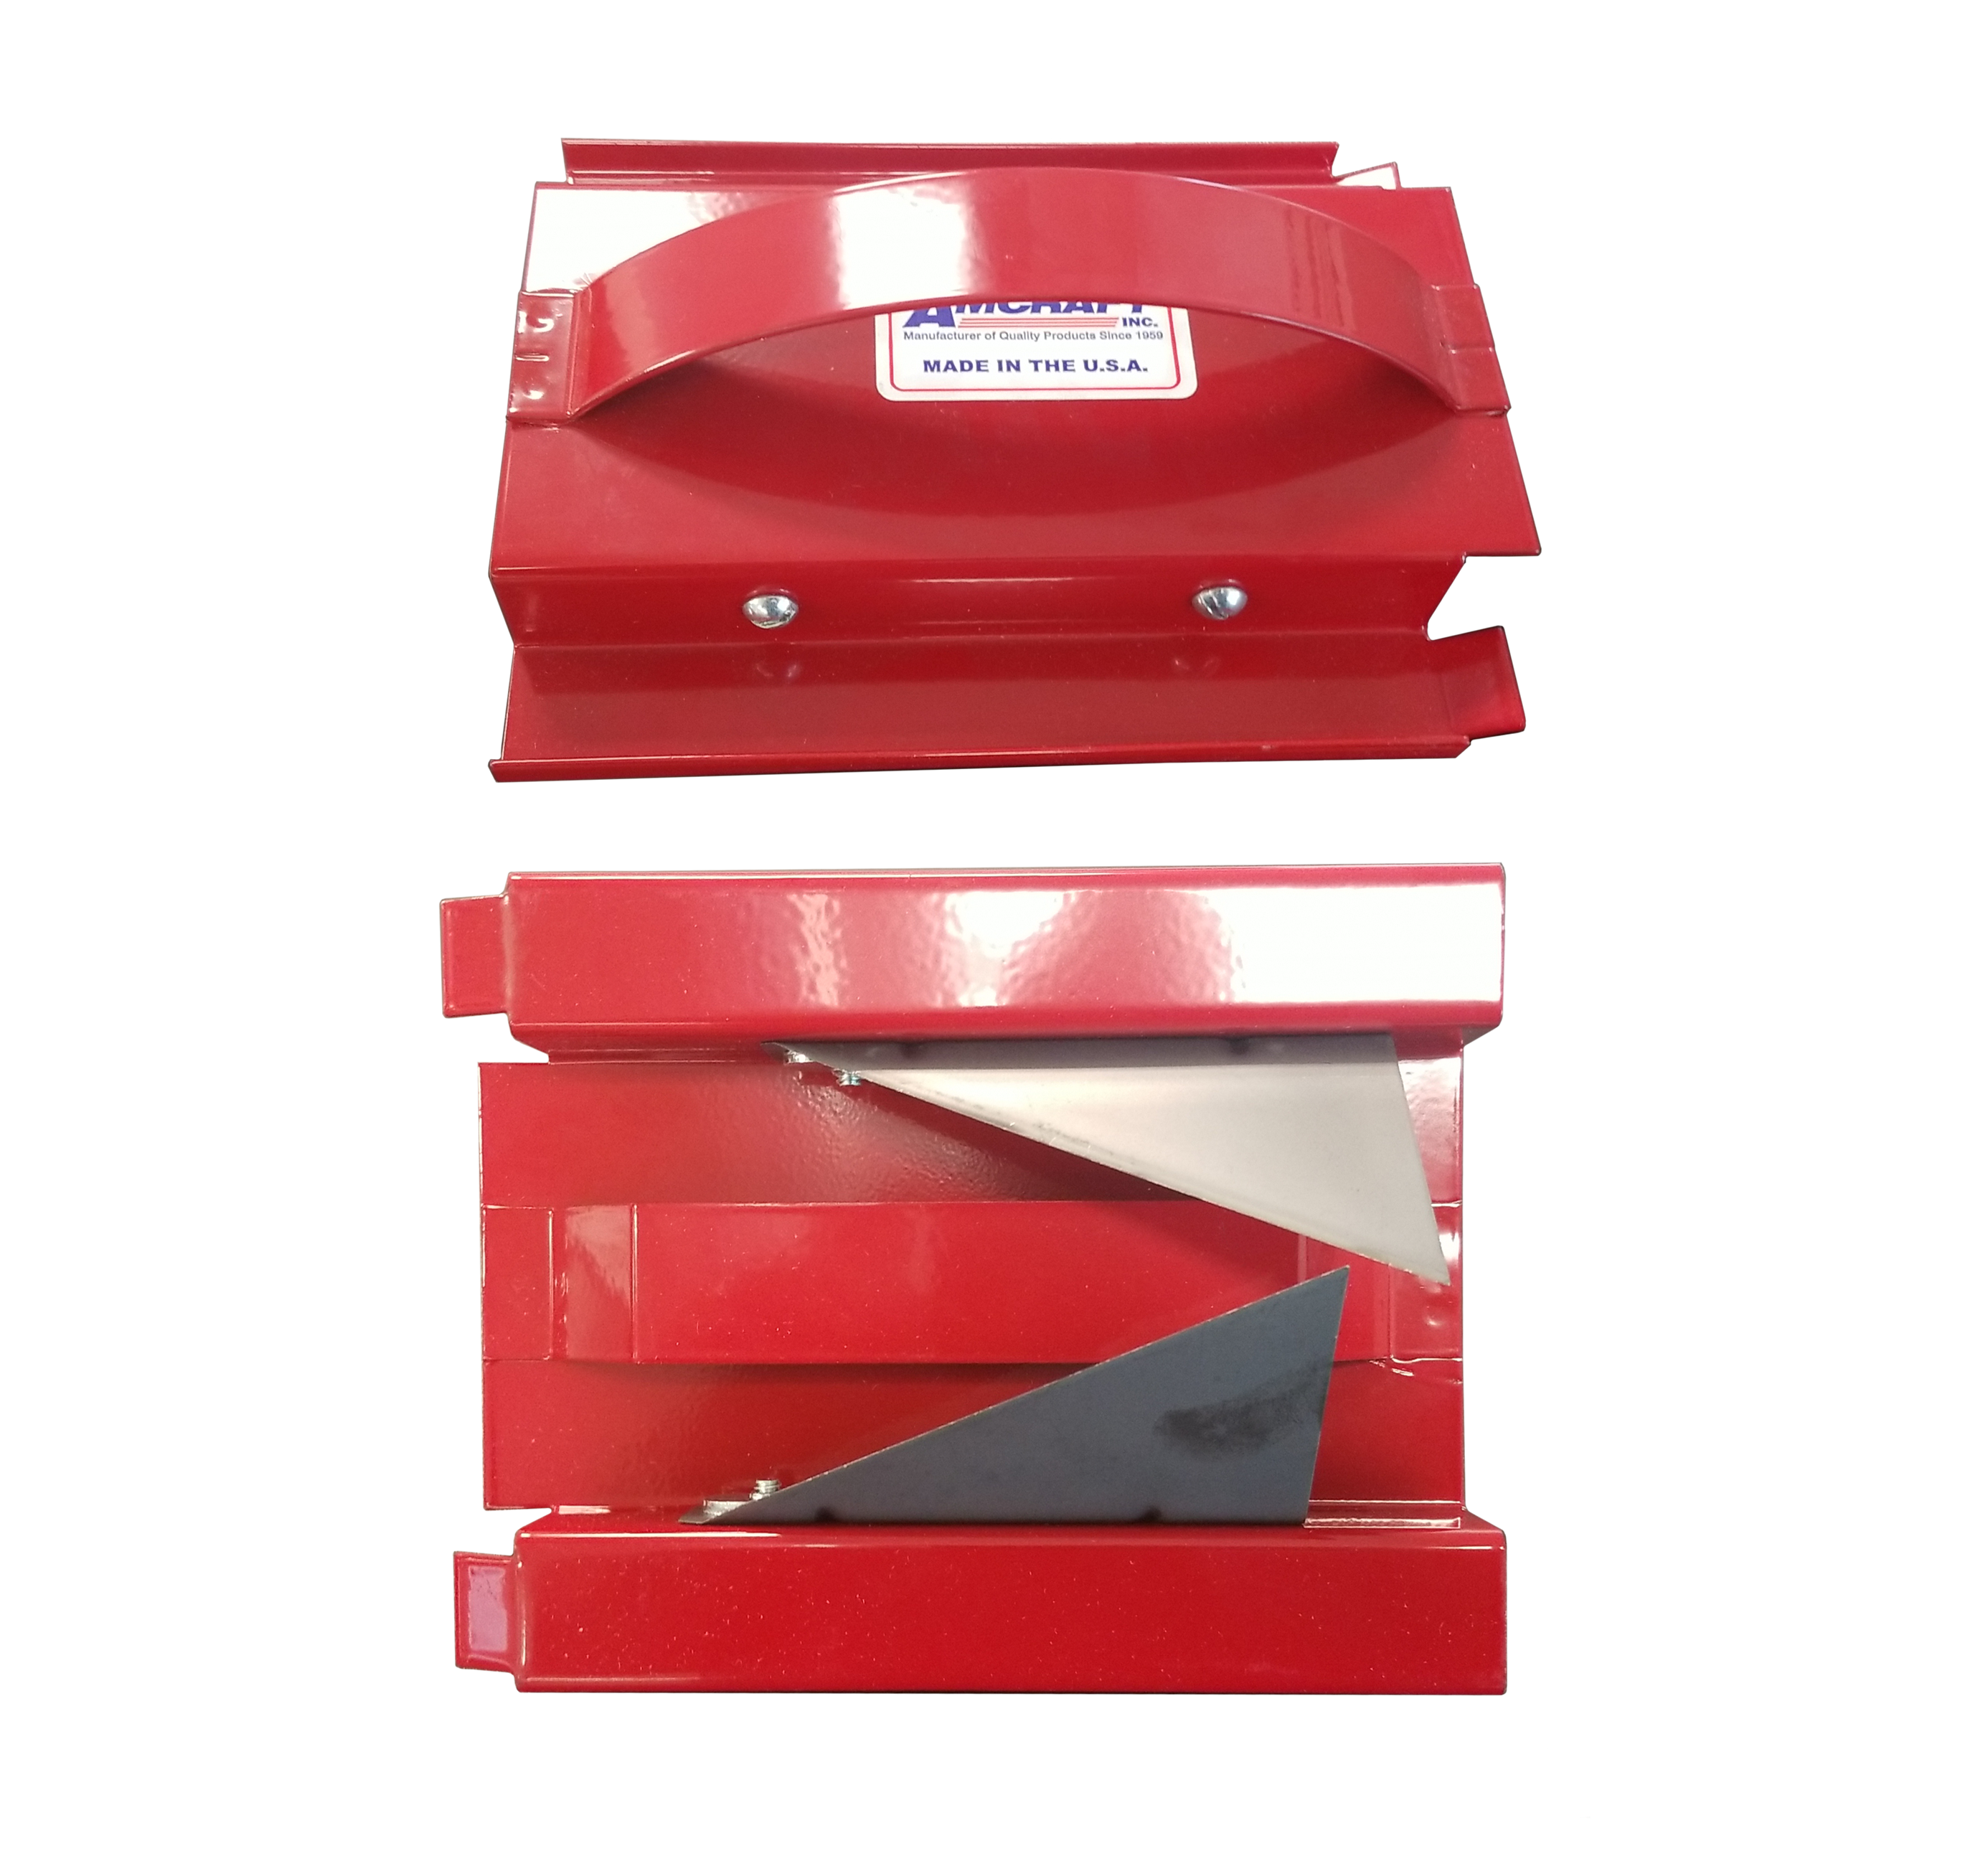 https://www.conklinmetal.com/wp-content/uploads/2022/04/Amcraft-Red-Ductboard-Grooving-Tool.png